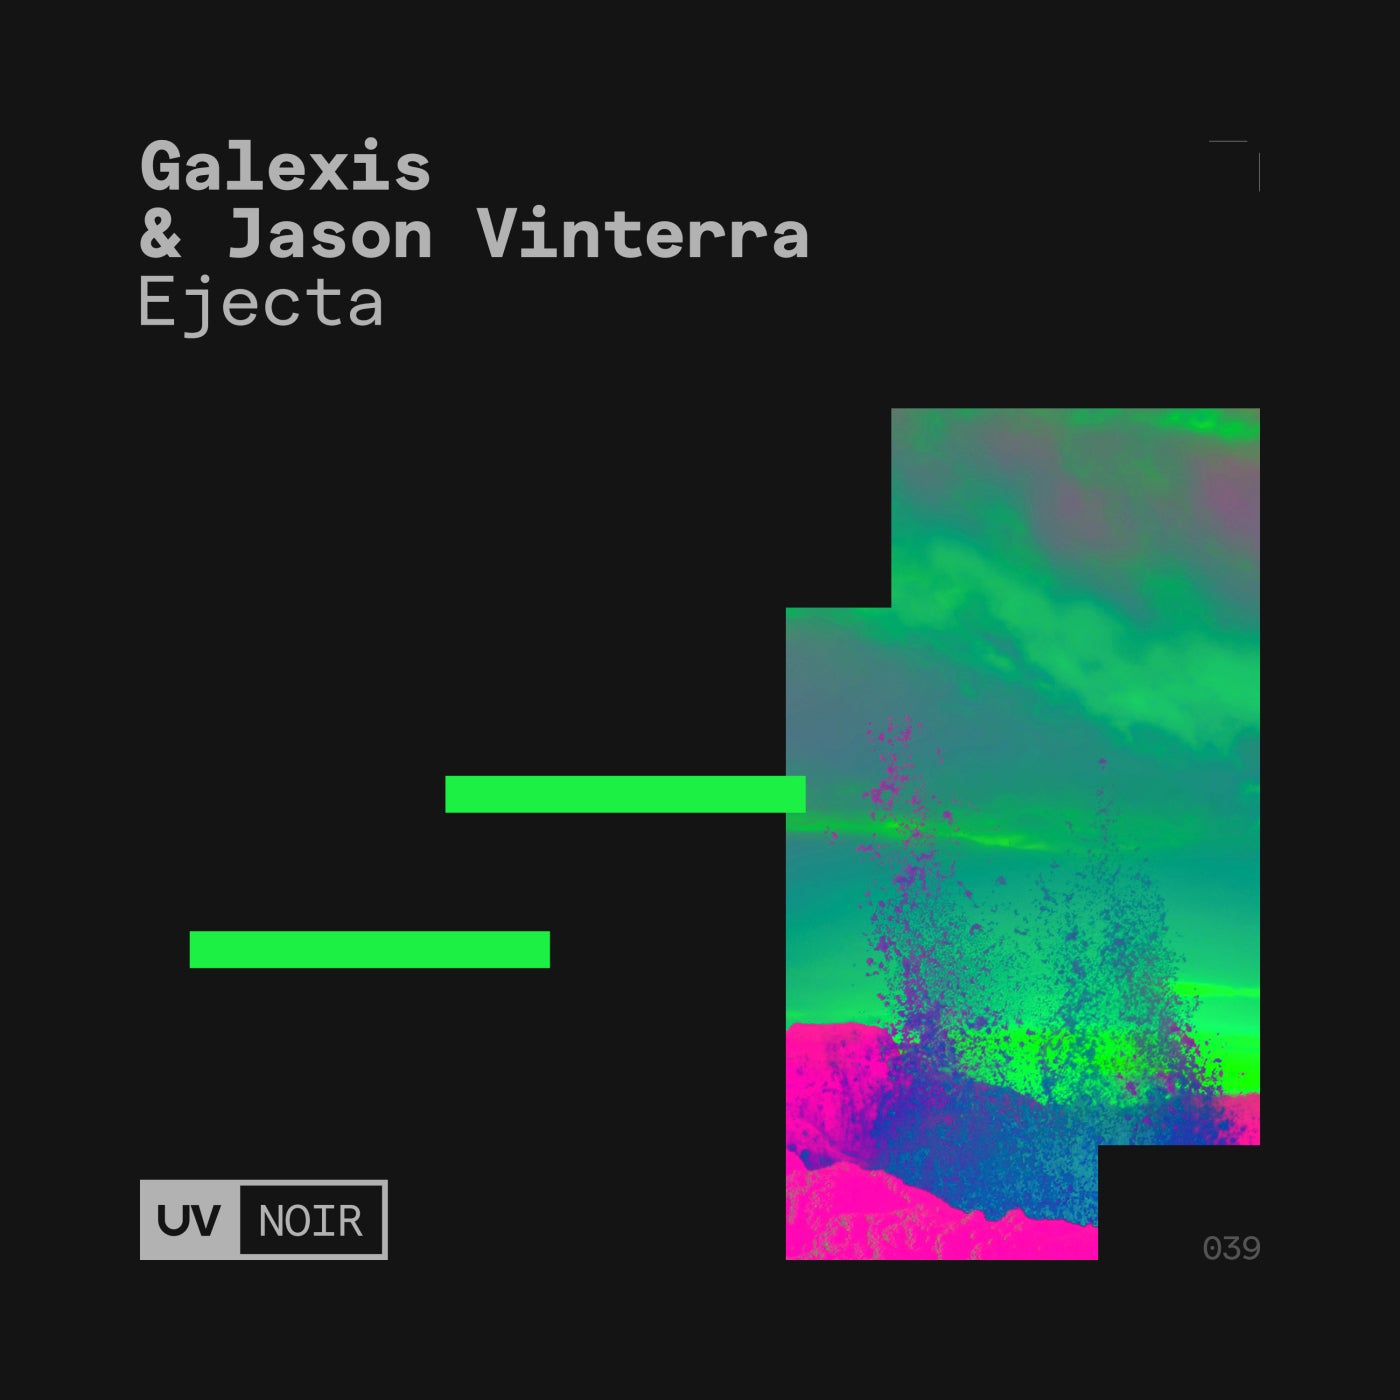 Galexis And Jason Vinterra - Ejecta (extended Mix) on Revolution Radio